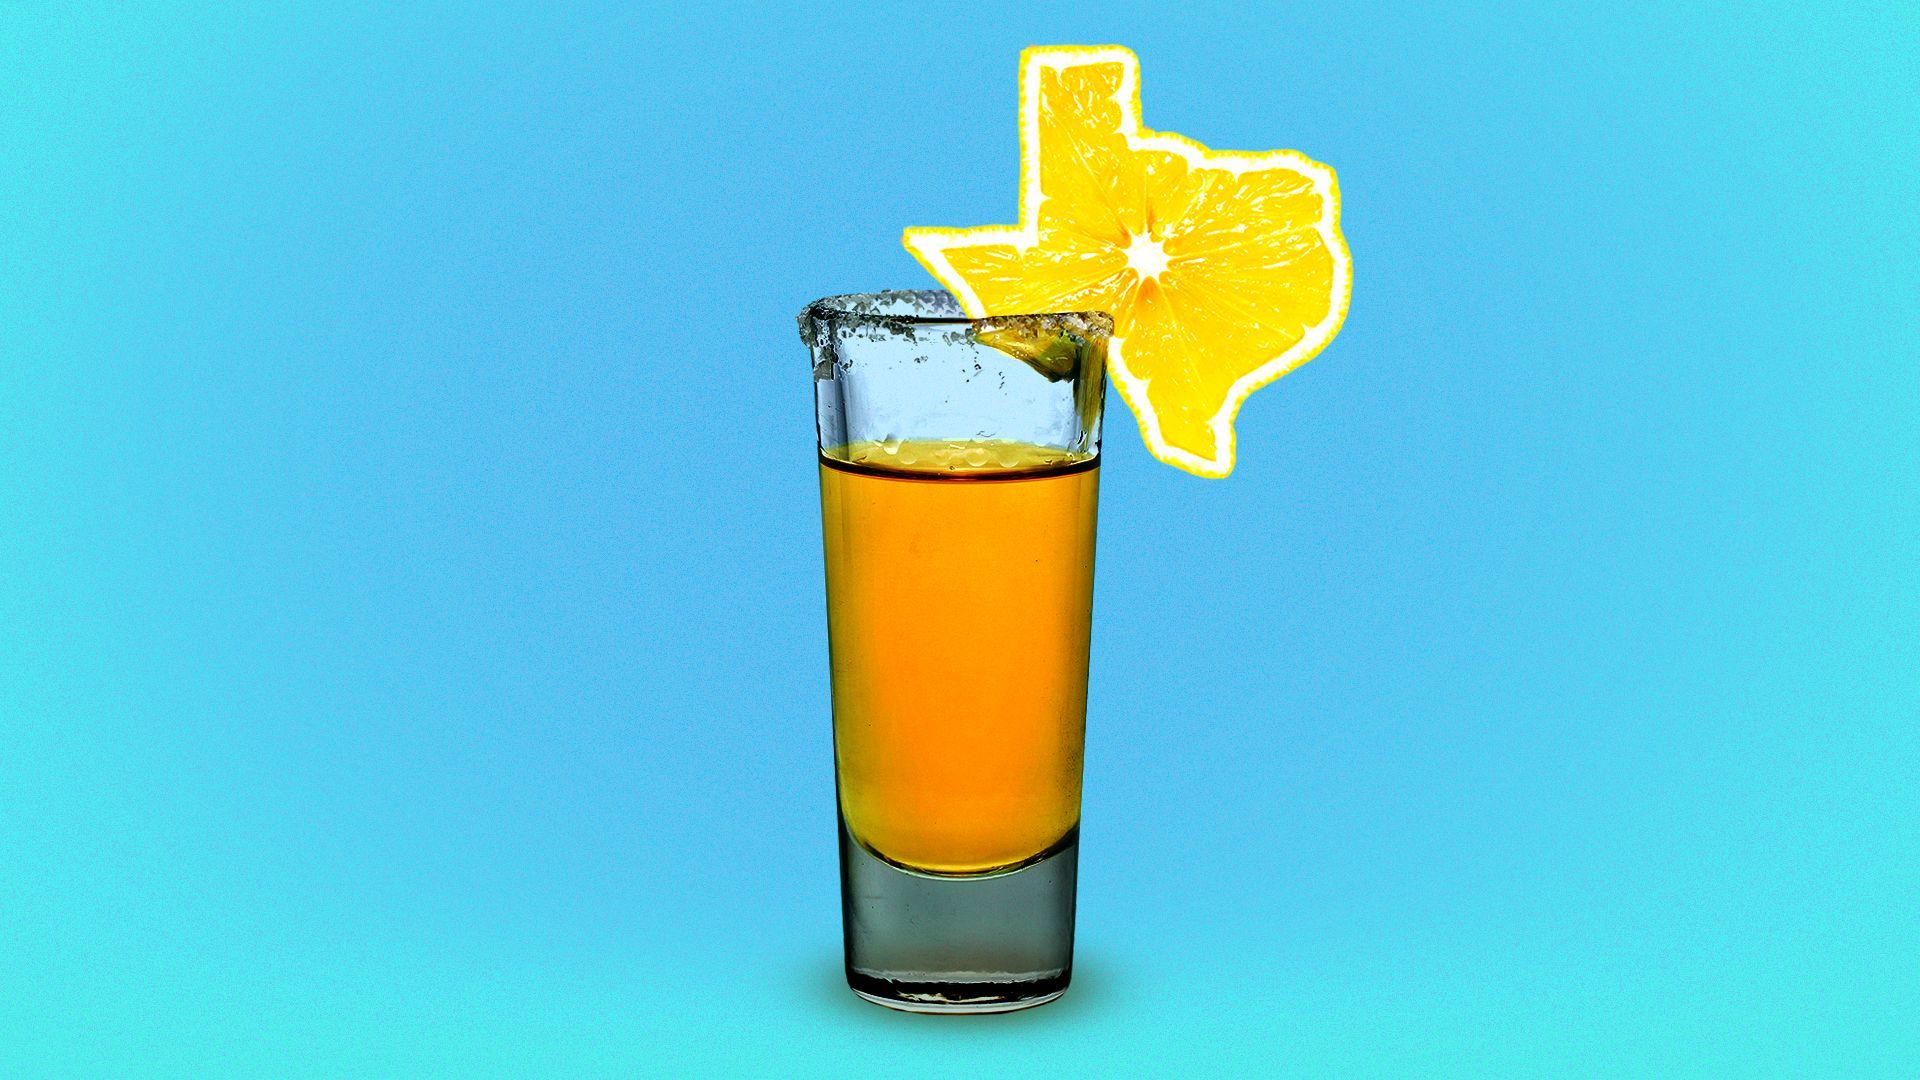 Illustration of a shot glass filled with tequila, dressed with a lemon shaped like Texas